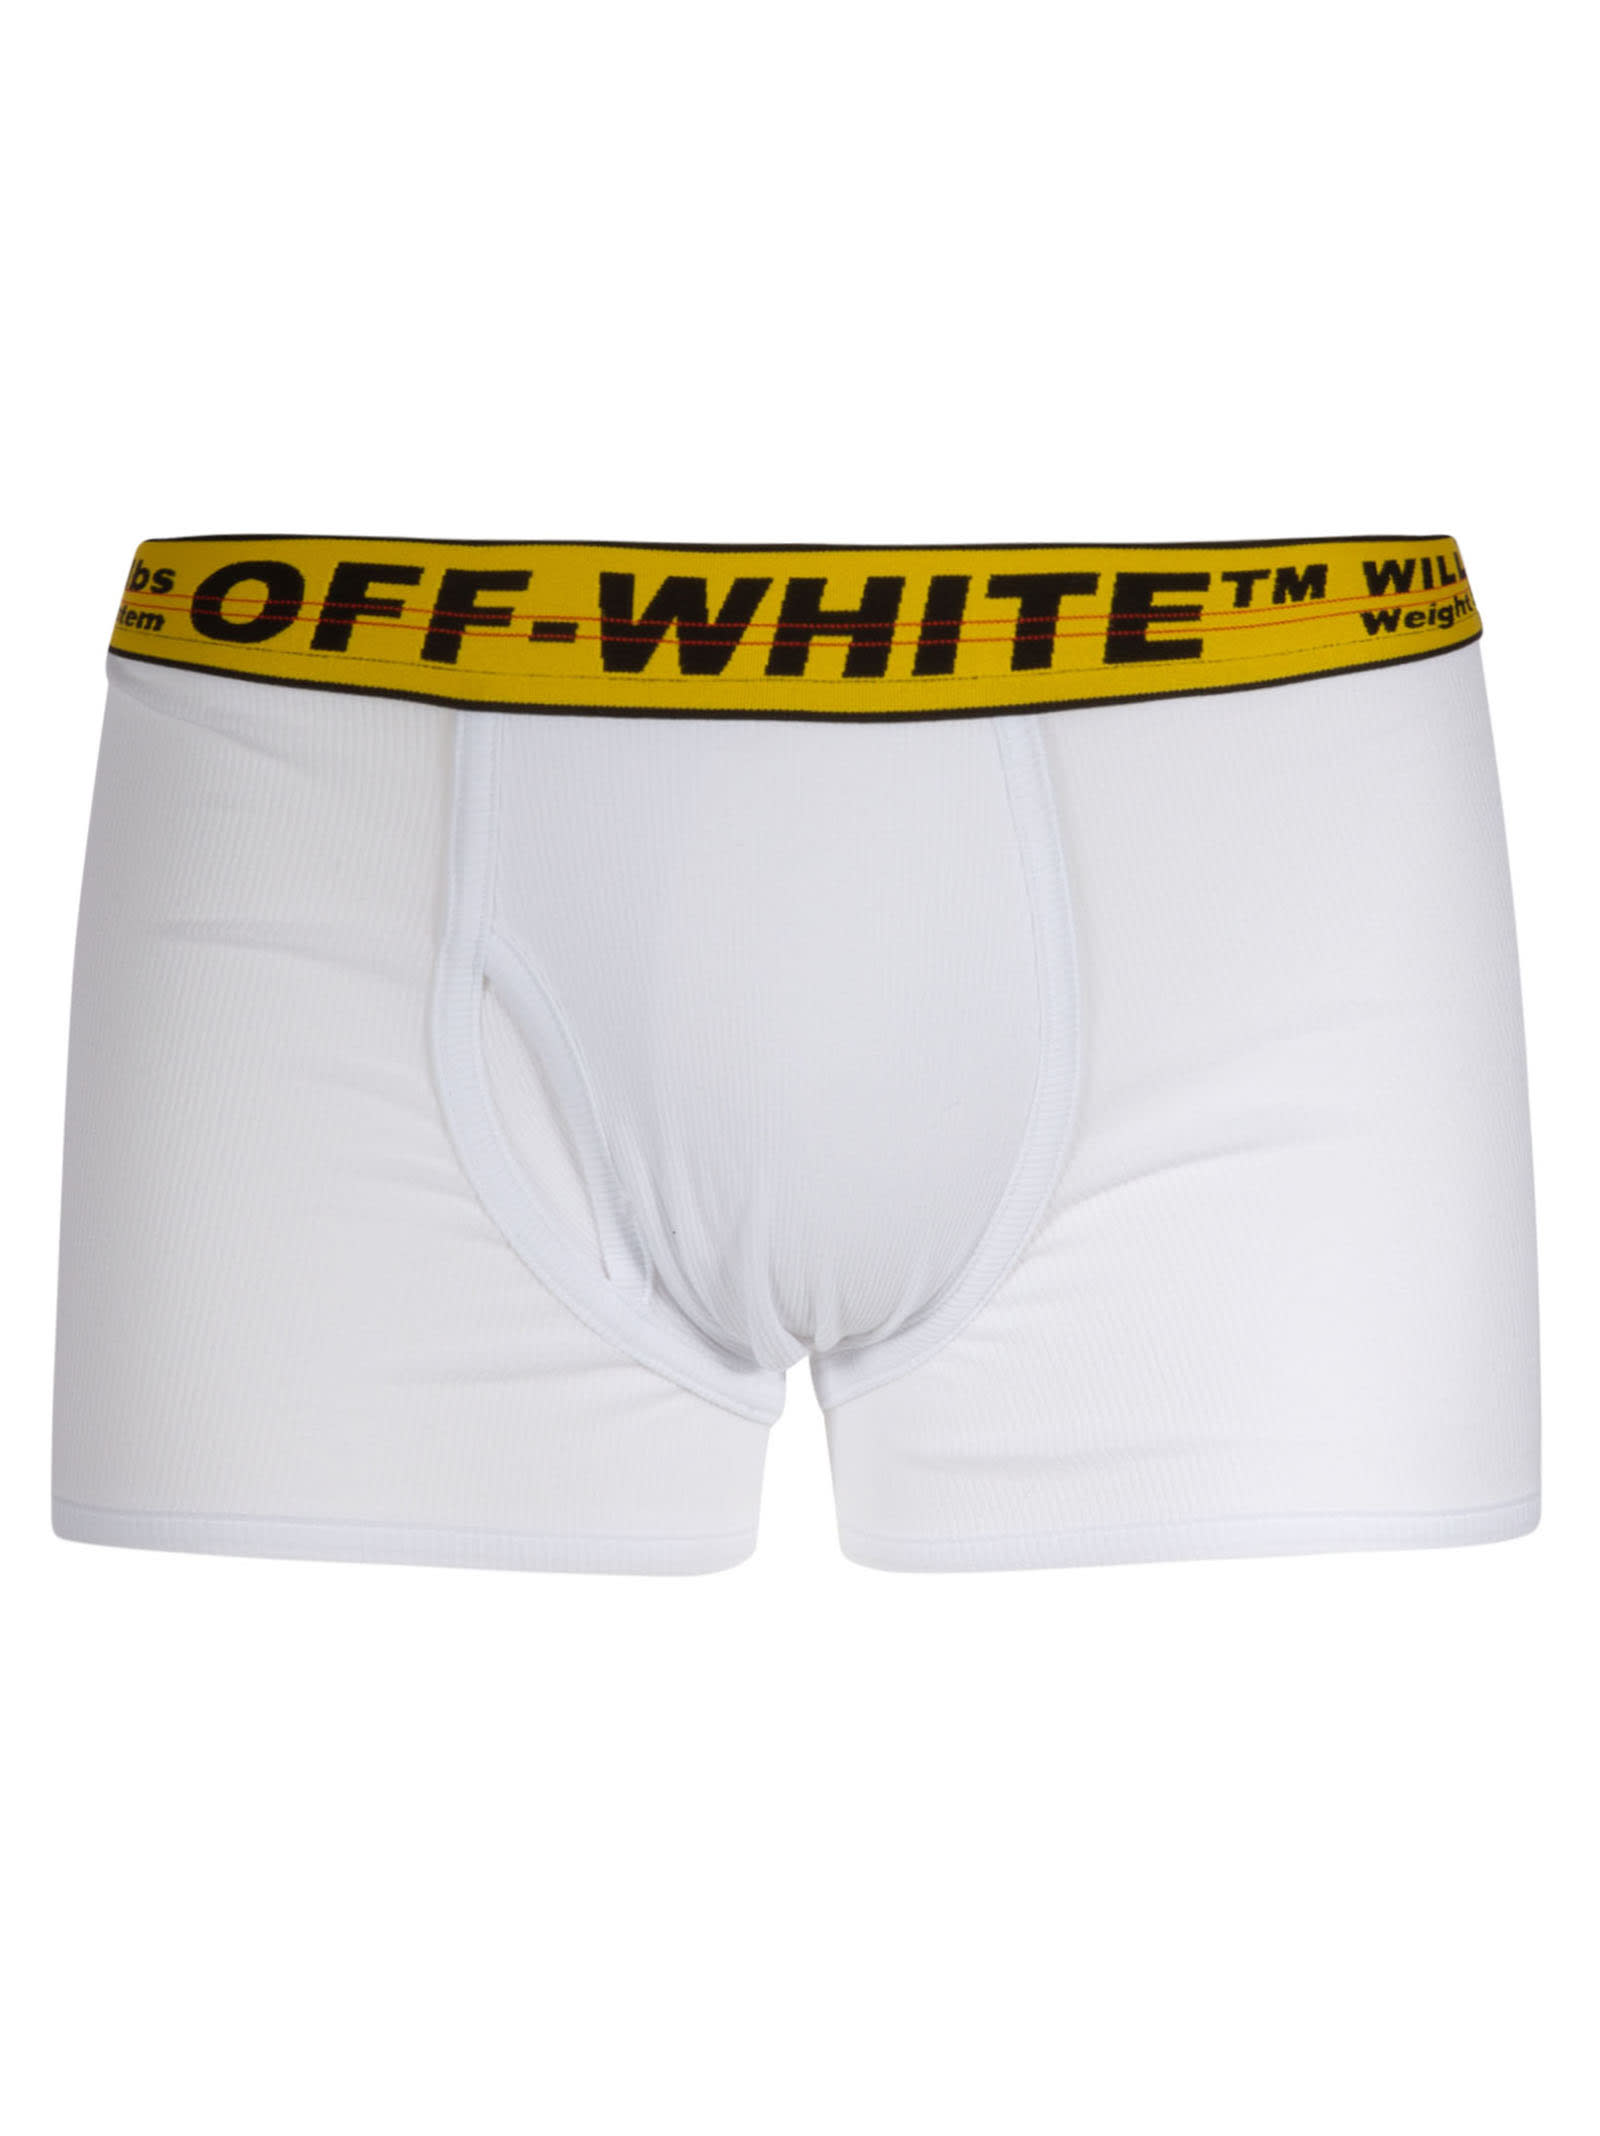 Off-White Tripack Classic Industrial Boxer Shorts